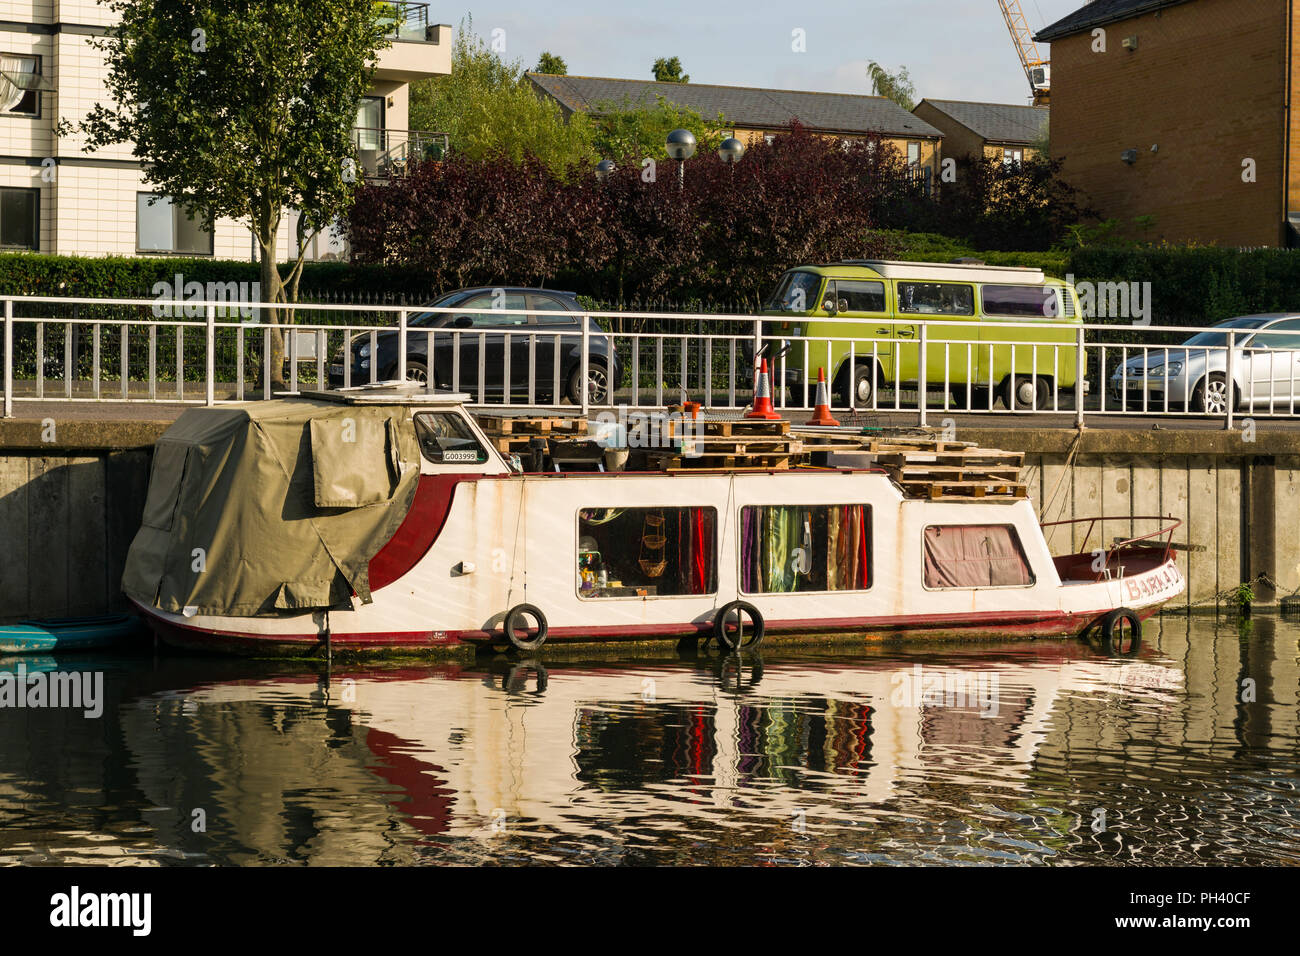 A narrowboat or narrow boat moored on the river Cam, used as long term alternative housing, Cambridge, UK Stock Photo